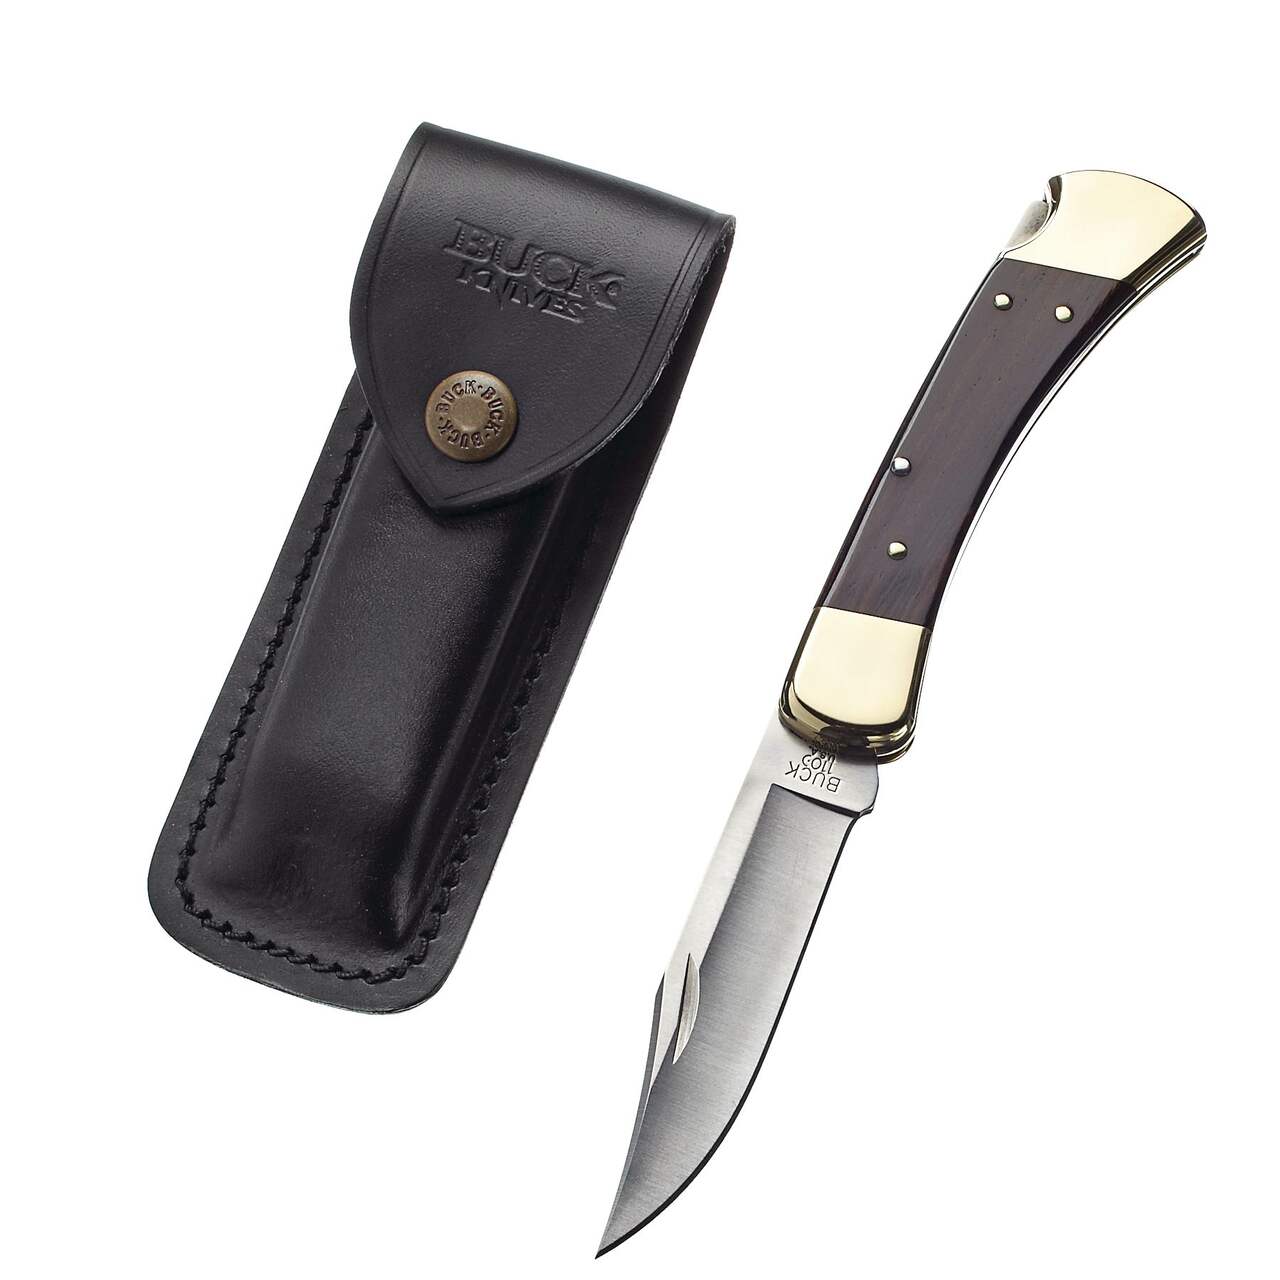 https://media-www.canadiantire.ca/product/playing/hunting/hunting-equipment/0756061/buck-110-folding-knife-0b2c31db-06d5-44ee-9d0e-a2252f0544e5-jpgrendition.jpg?imdensity=1&imwidth=640&impolicy=mZoom